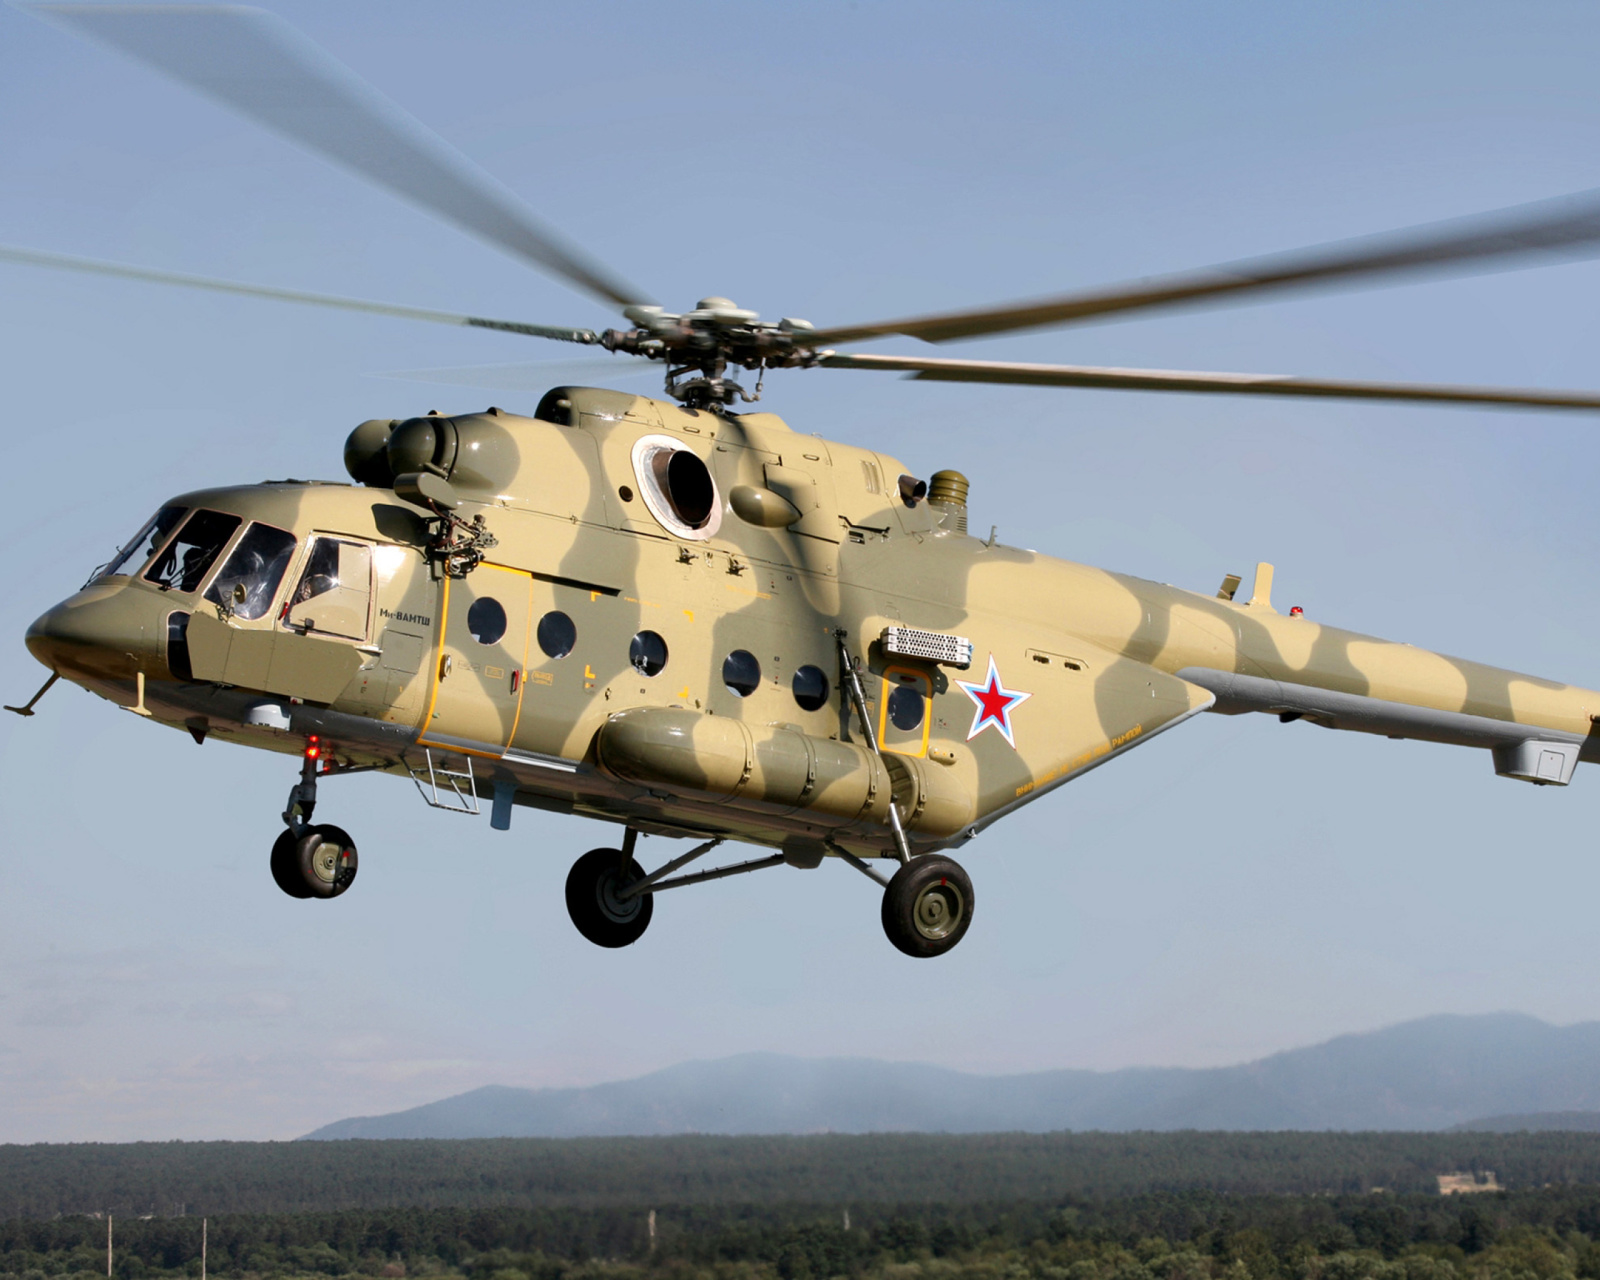 Mil Mi 17 Russian Helicopter wallpaper 1600x1280